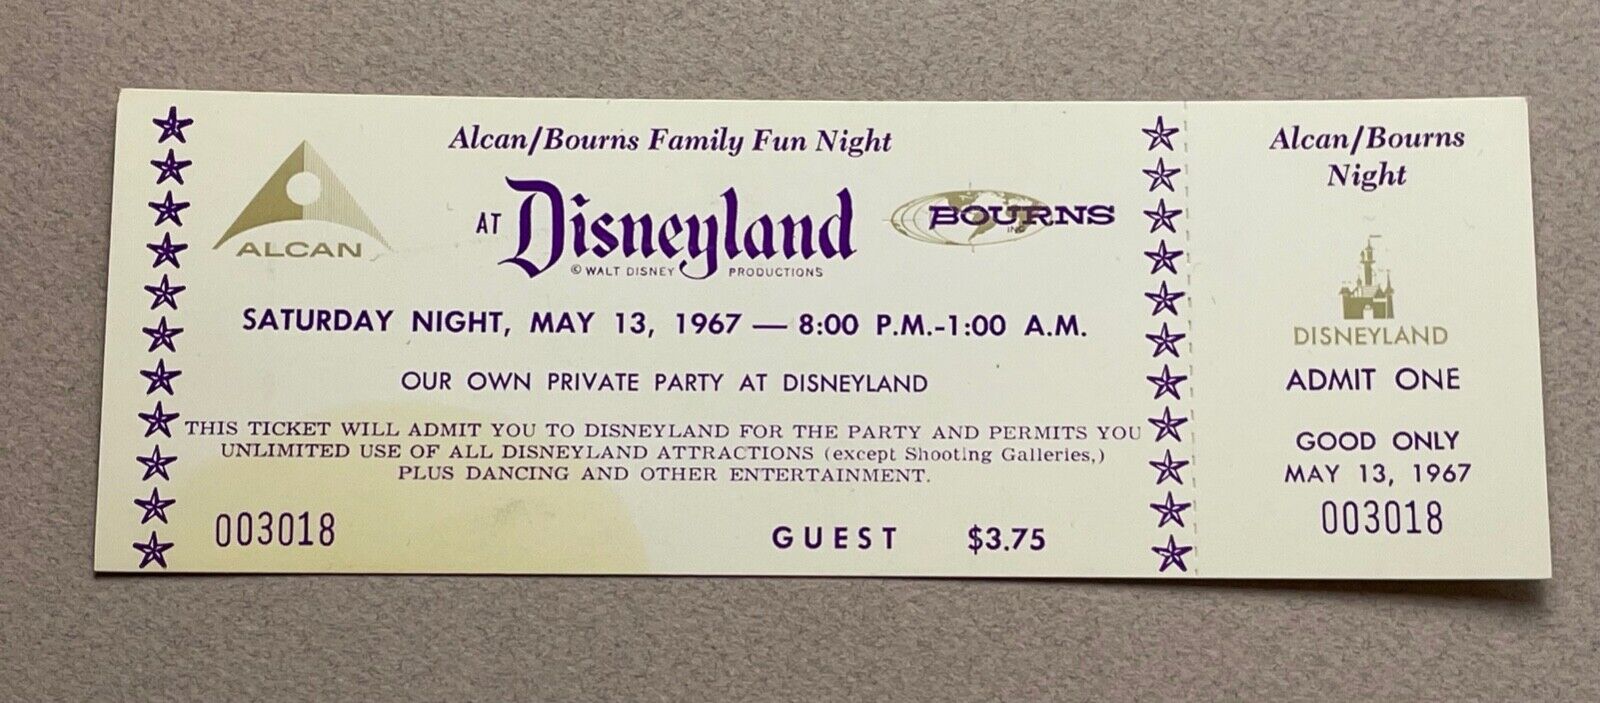 1967 DISNEYLAND Entrance Ticket to the Alcan/Bourns Night Party UNUSED vintage